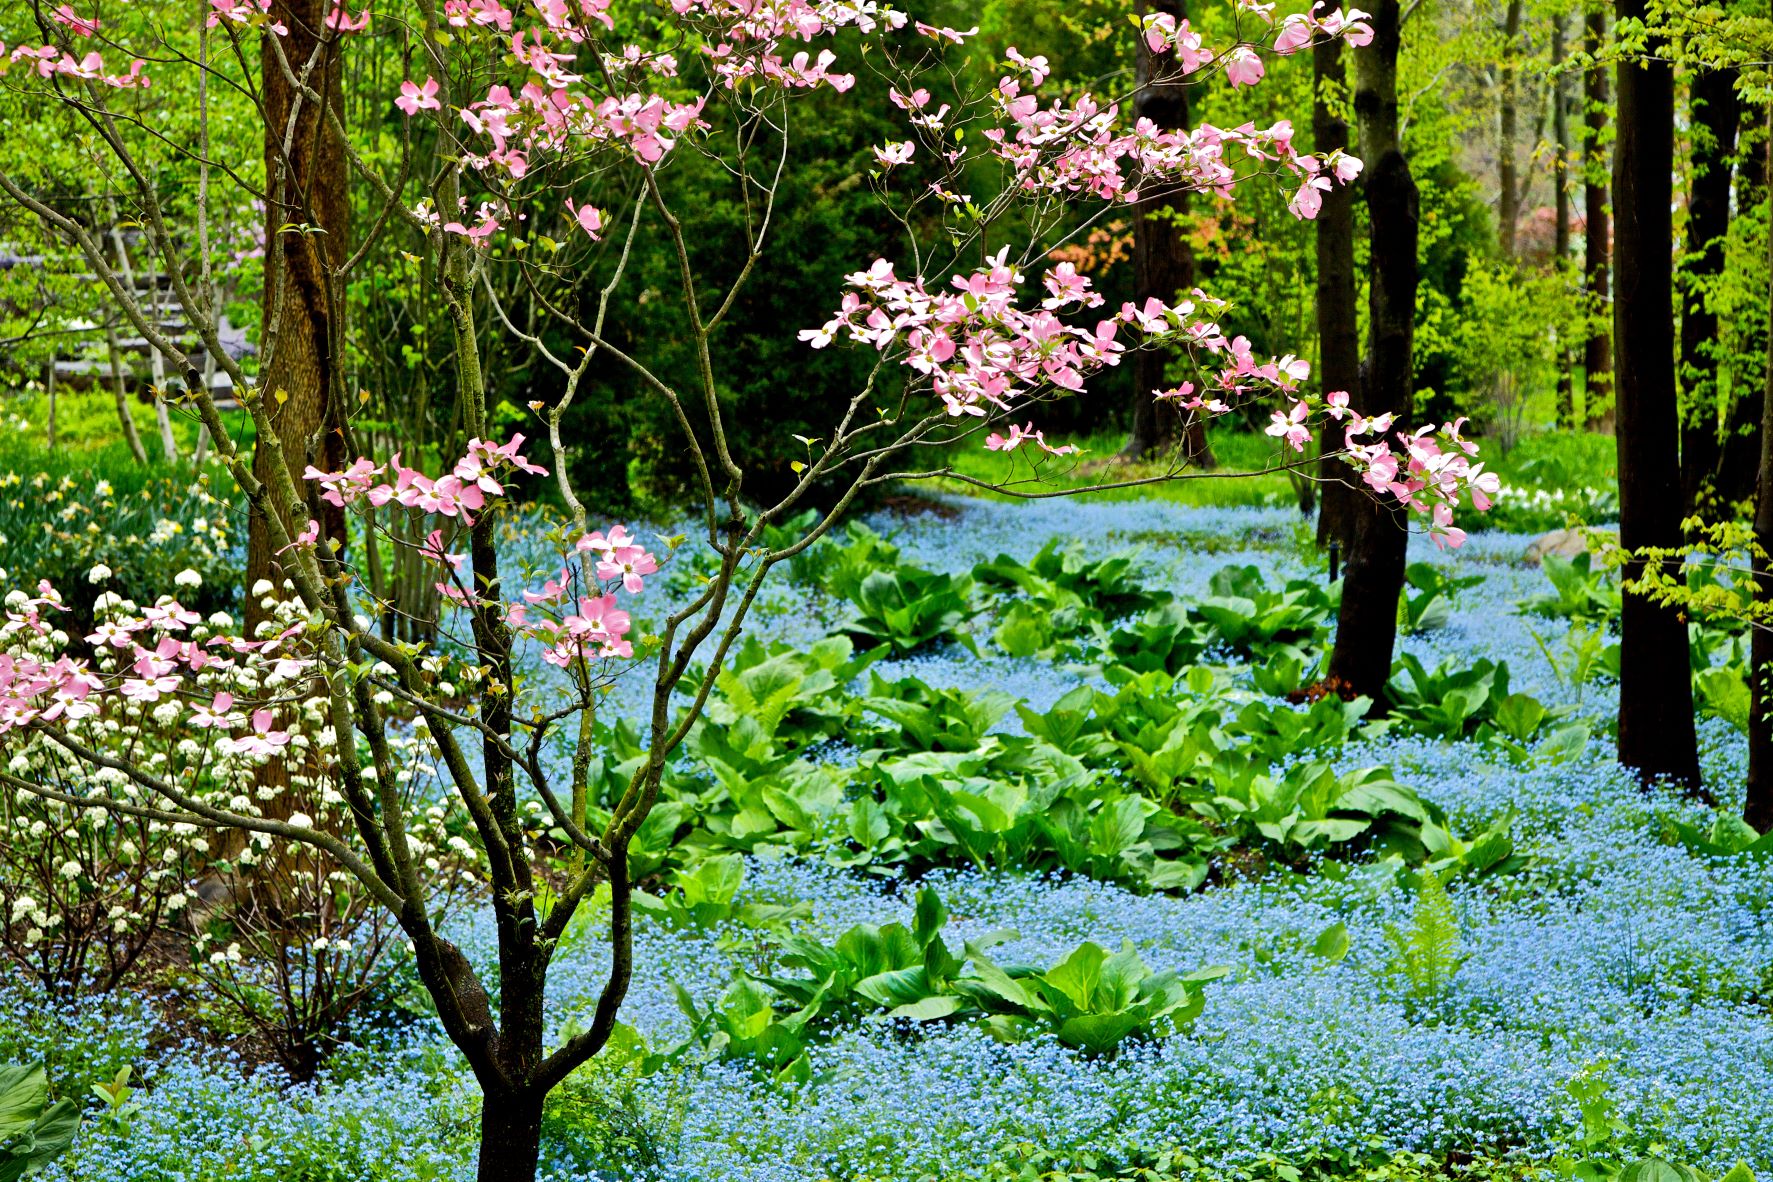 Garden in spring with flowers in bloom everywhere